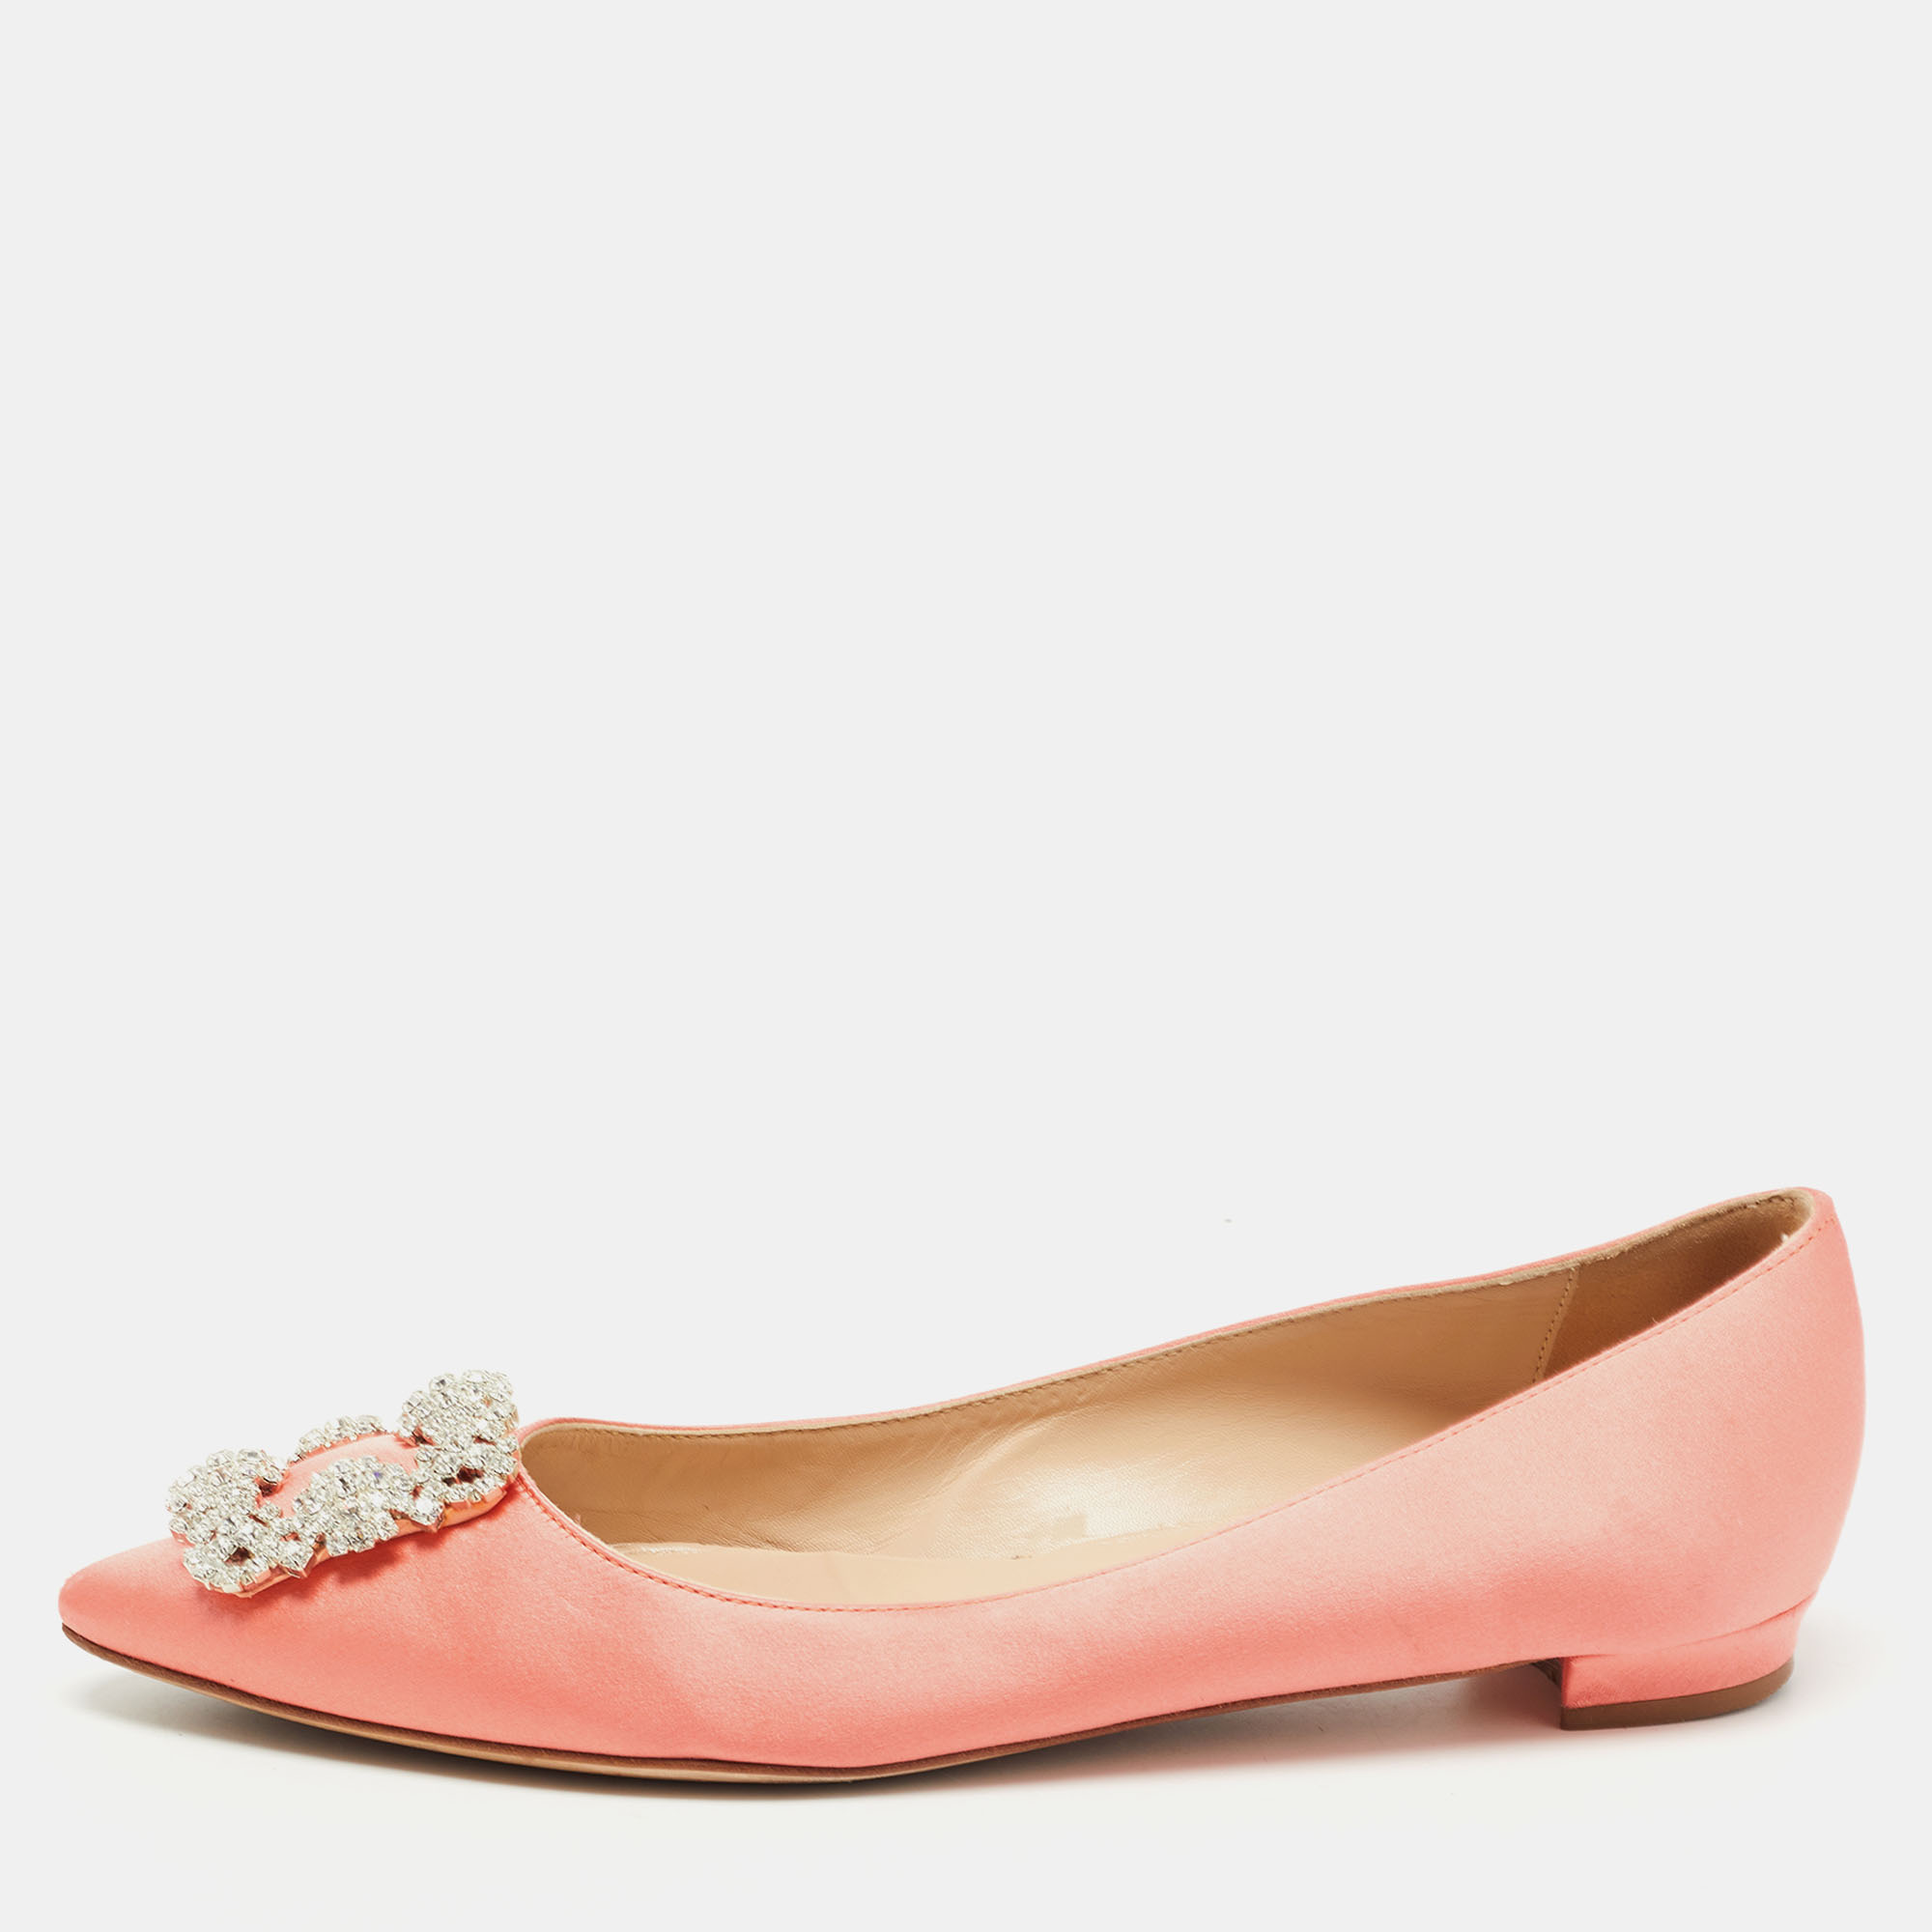 Pre-owned Manolo Blahnik Peach Pink Satin Hangisi Ballet Flats Size 38.5